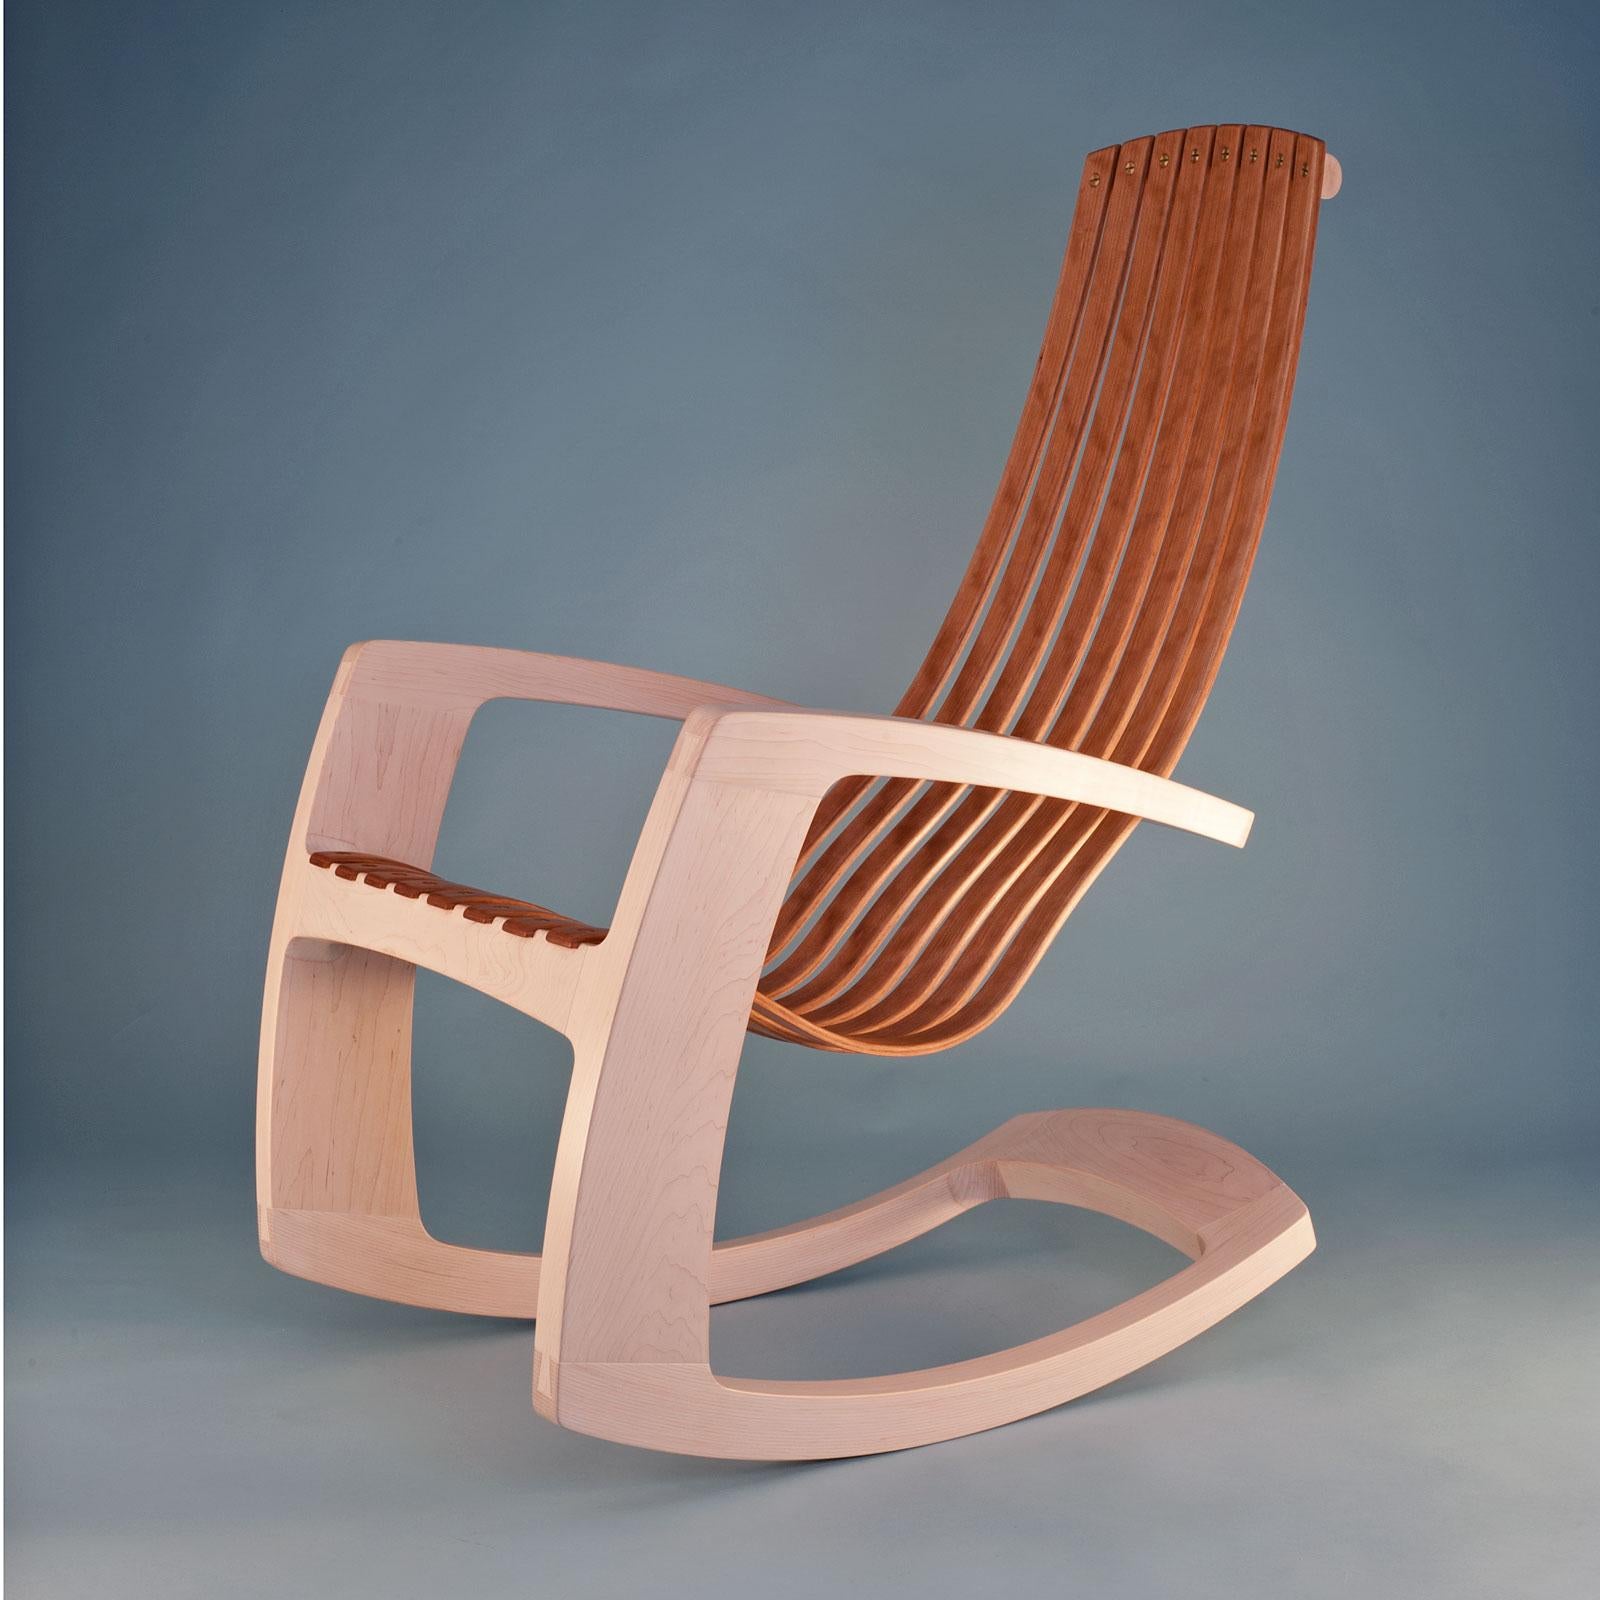 J. Rusten Studio-Crafted Sculptural Modern Rocking Chair in Maple and Cherry In New Condition For Sale In Stockton, CA